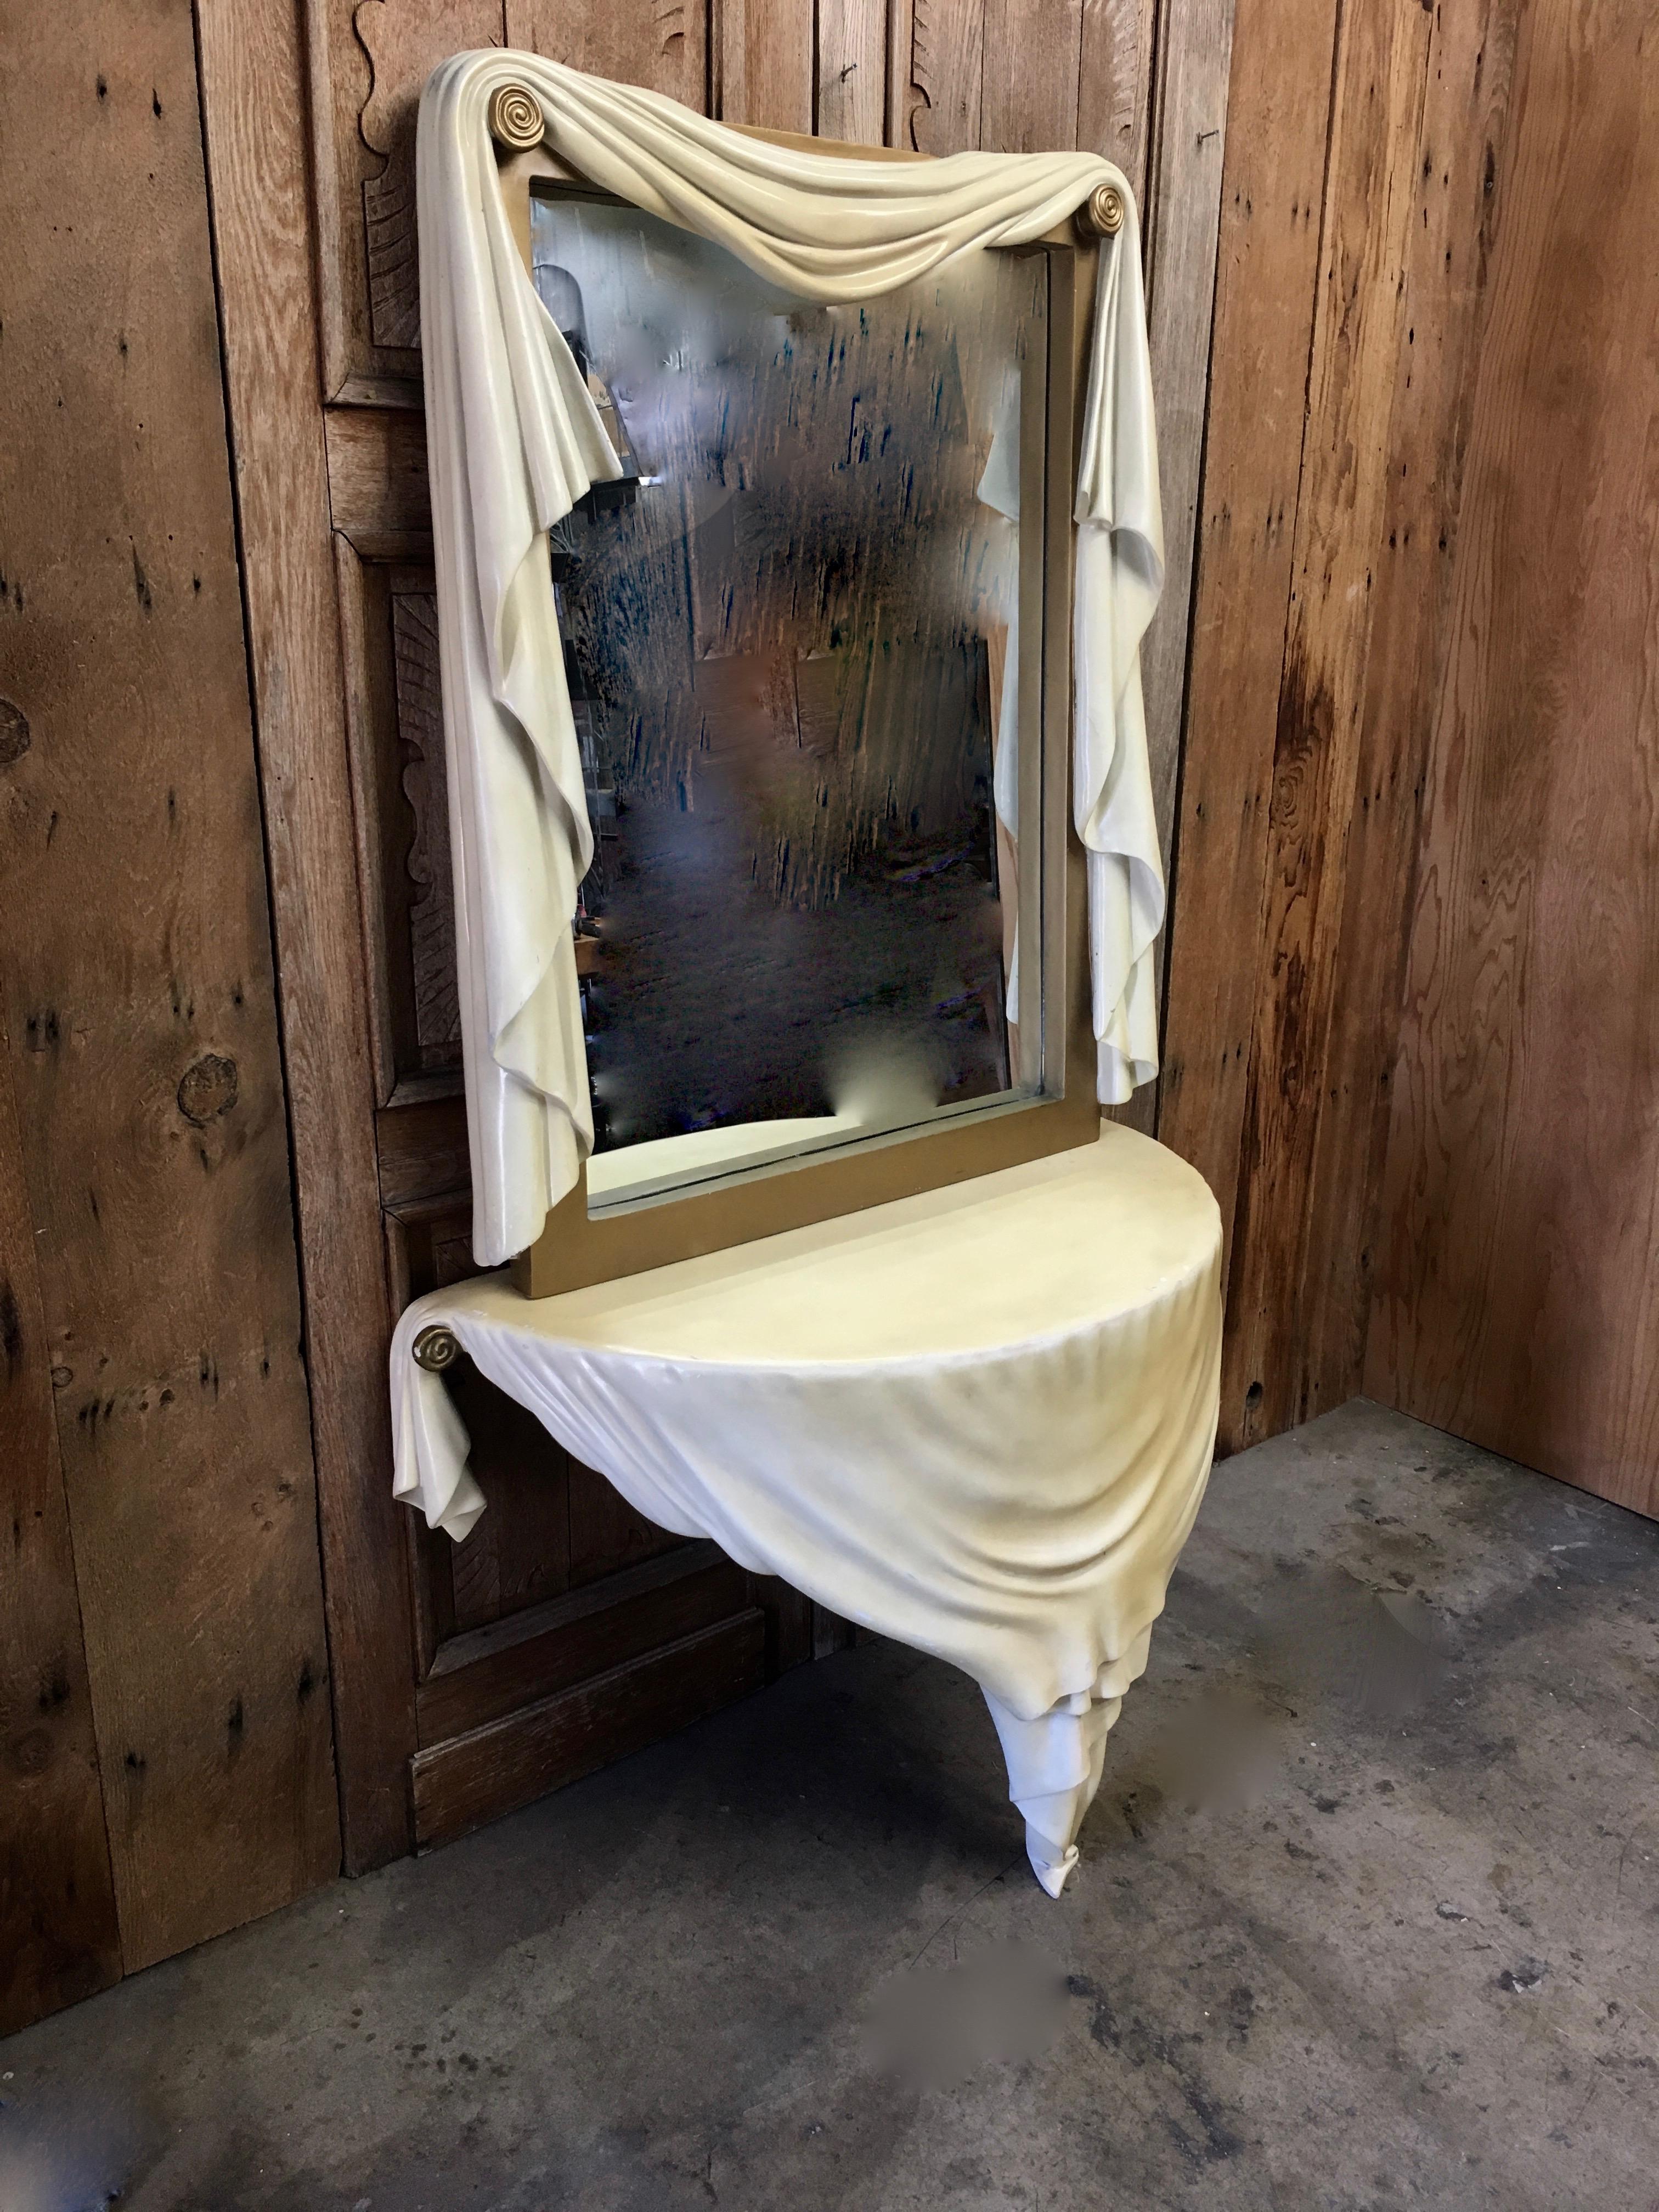 This Antique style surreal fantasy piece is made of fiberglass, that the table mounts to the wall and the mirror can be hung above the table or simply sit on top the table.